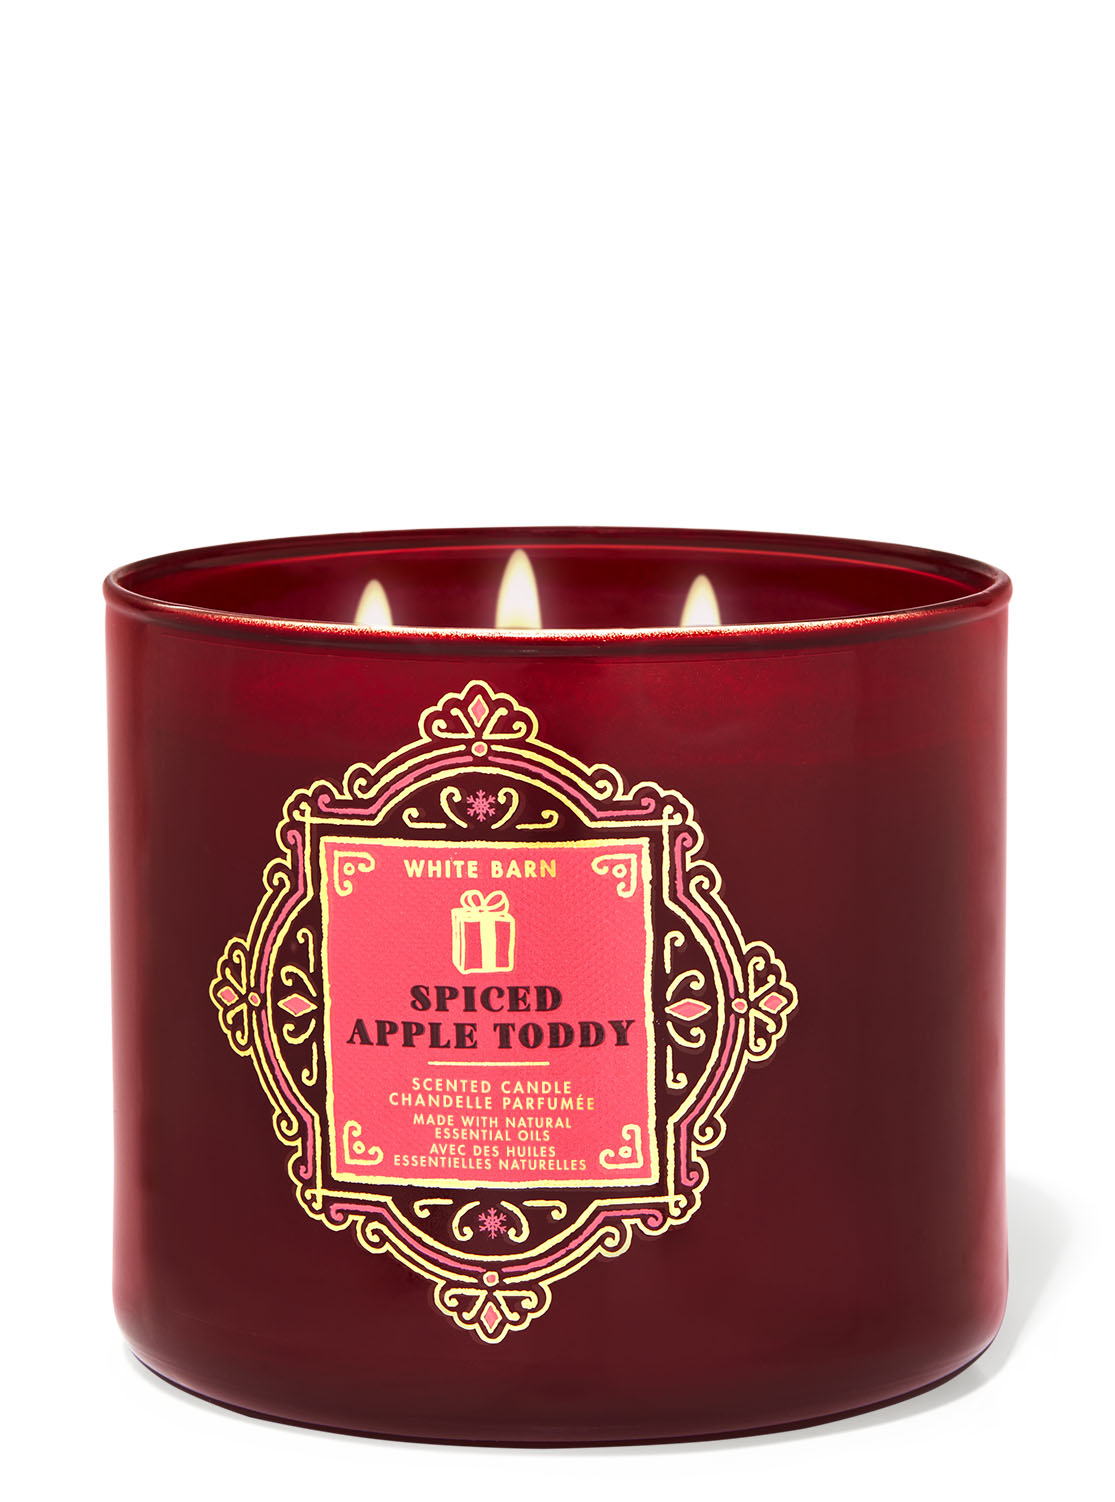 QTY 6 x Bath & Body Works Spiced Apple Toddy 3 Wick 14.5 Oz Scented Candle Lot 